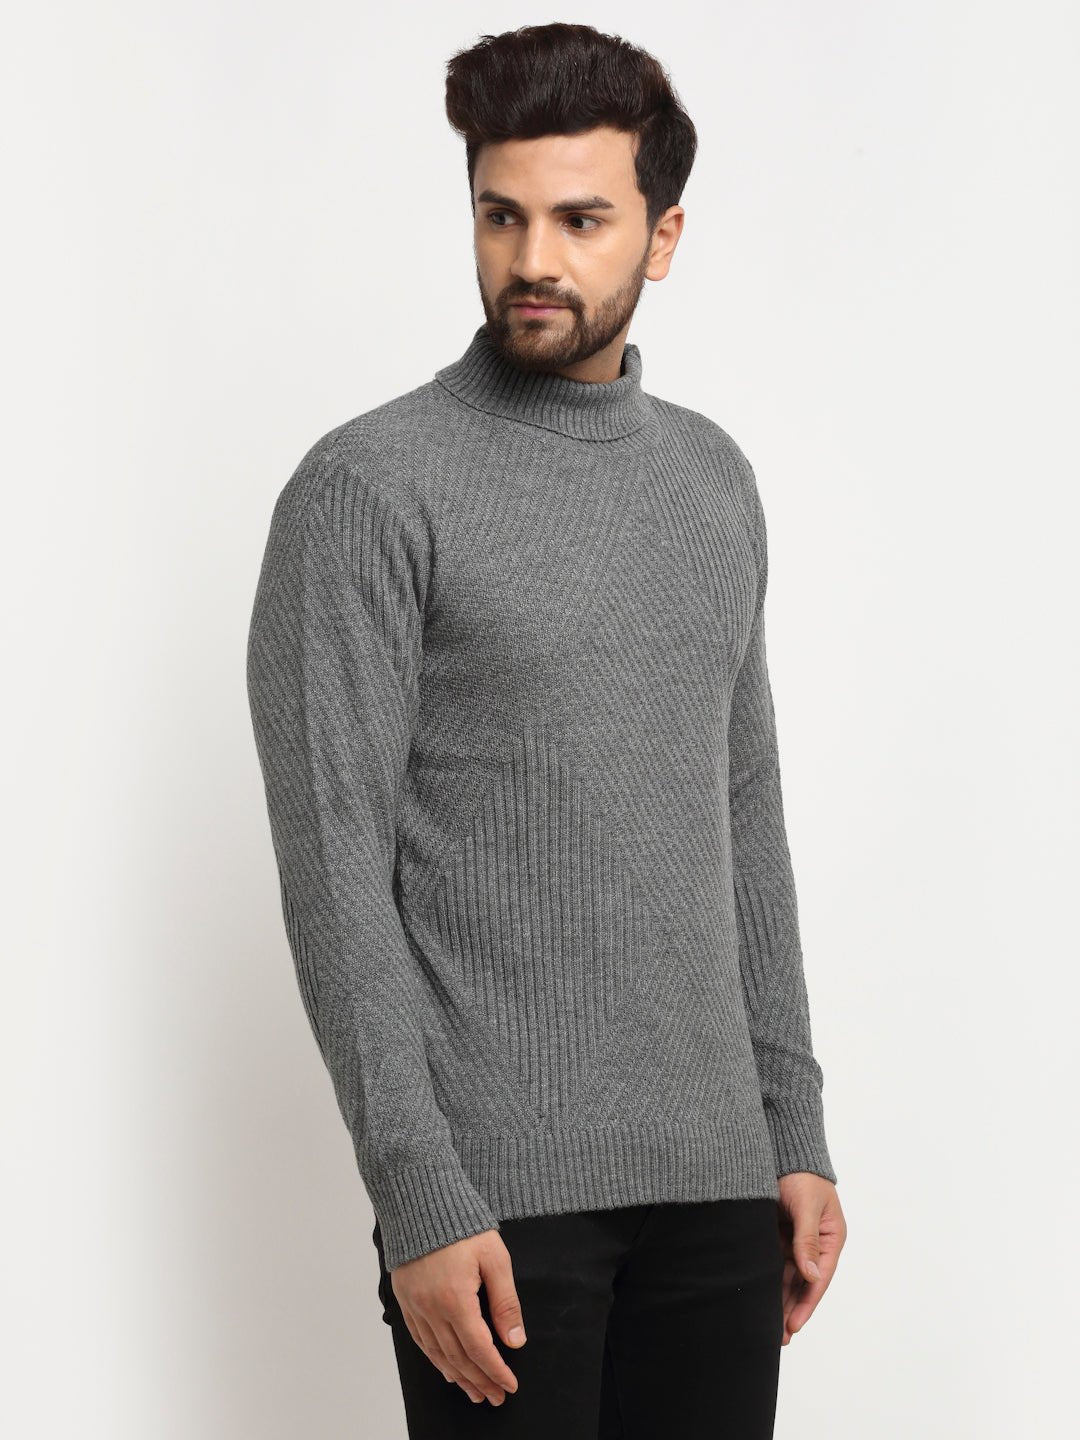 Anthra Ribbed High Neck Sweater - clubyork